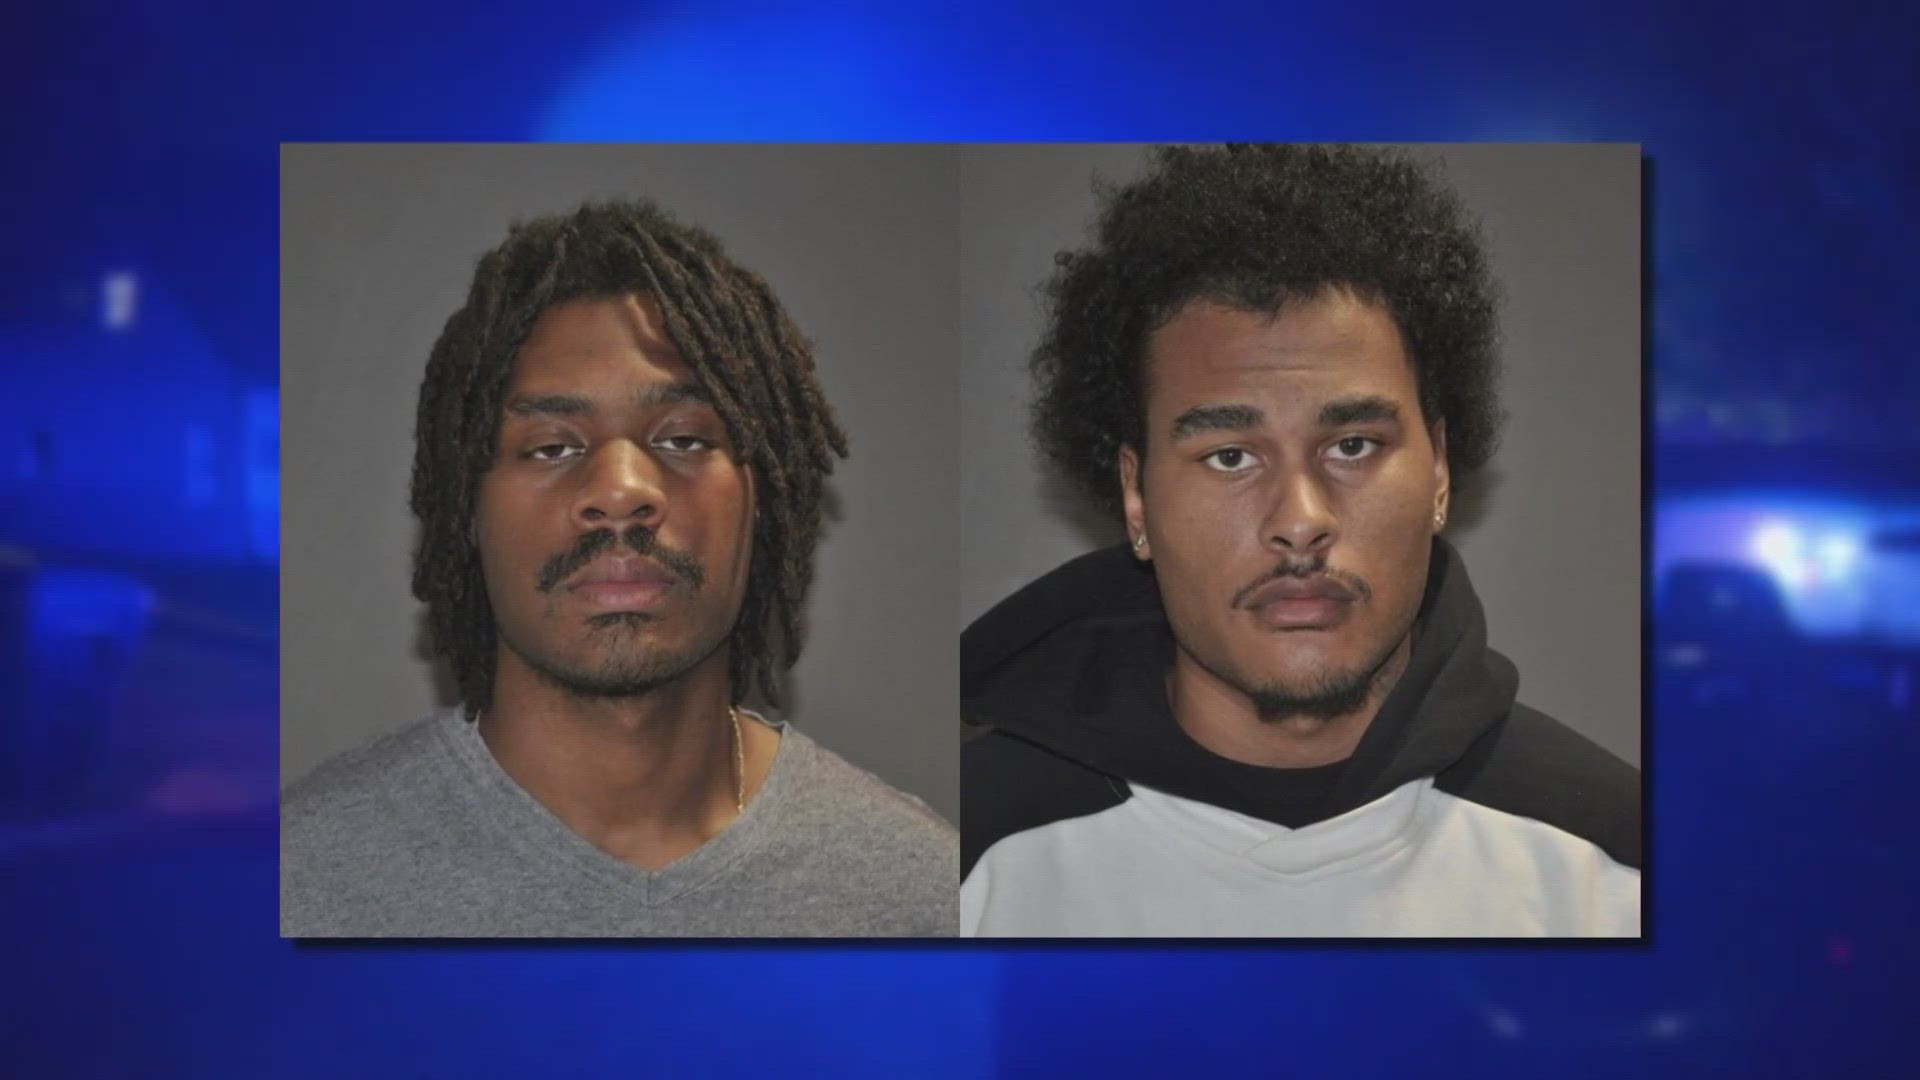 The Whitehall Division of Police announced the arrests of 23-year-old Mario Wingate and 22-year-old Cameron Obey on Tuesday.